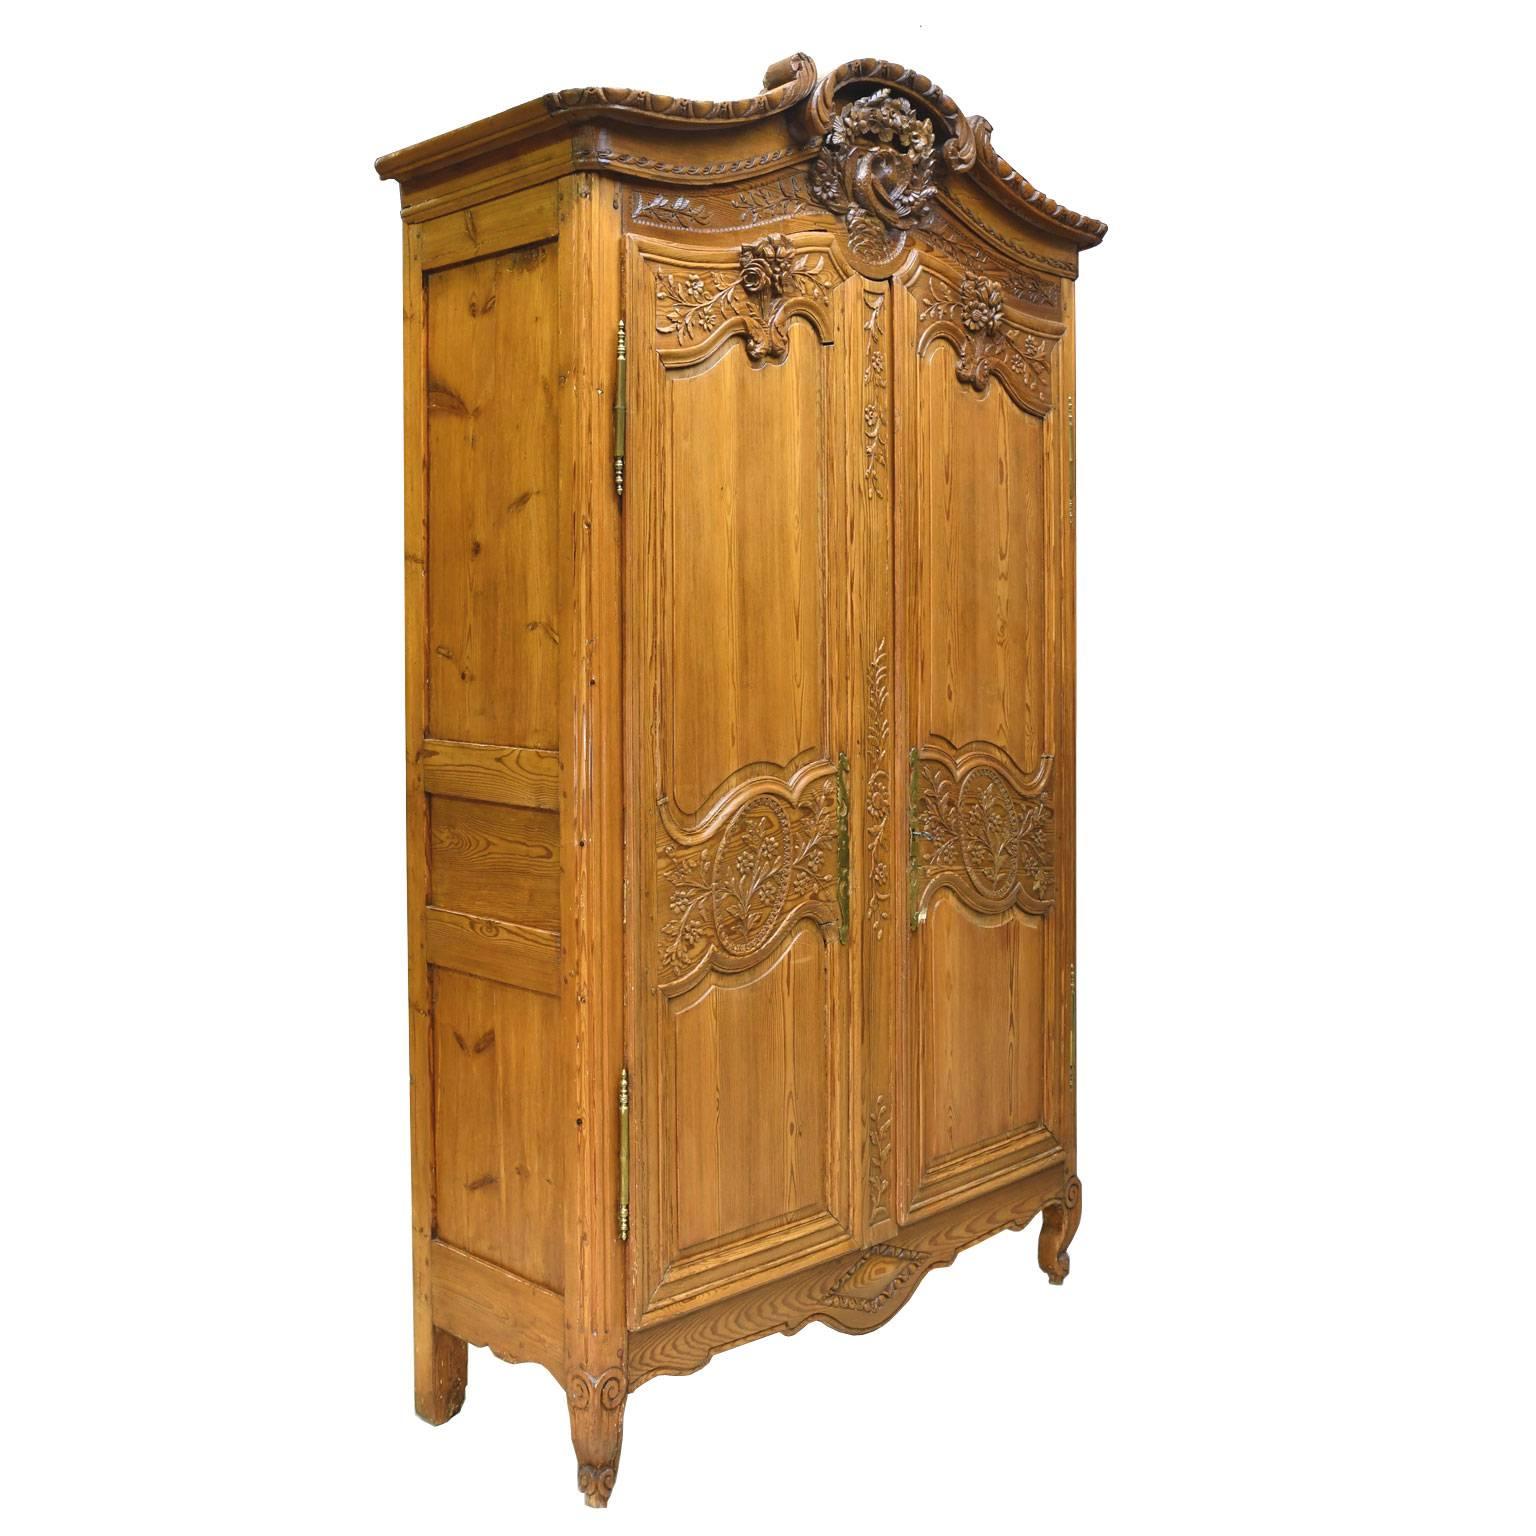 A very beautiful French wedding armoire from the Normandy region of France made of pitch pine, which is unique to French furniture-making. Unlike northern white pine, pitch pine was never painted over but was always presented as a finished wood. The